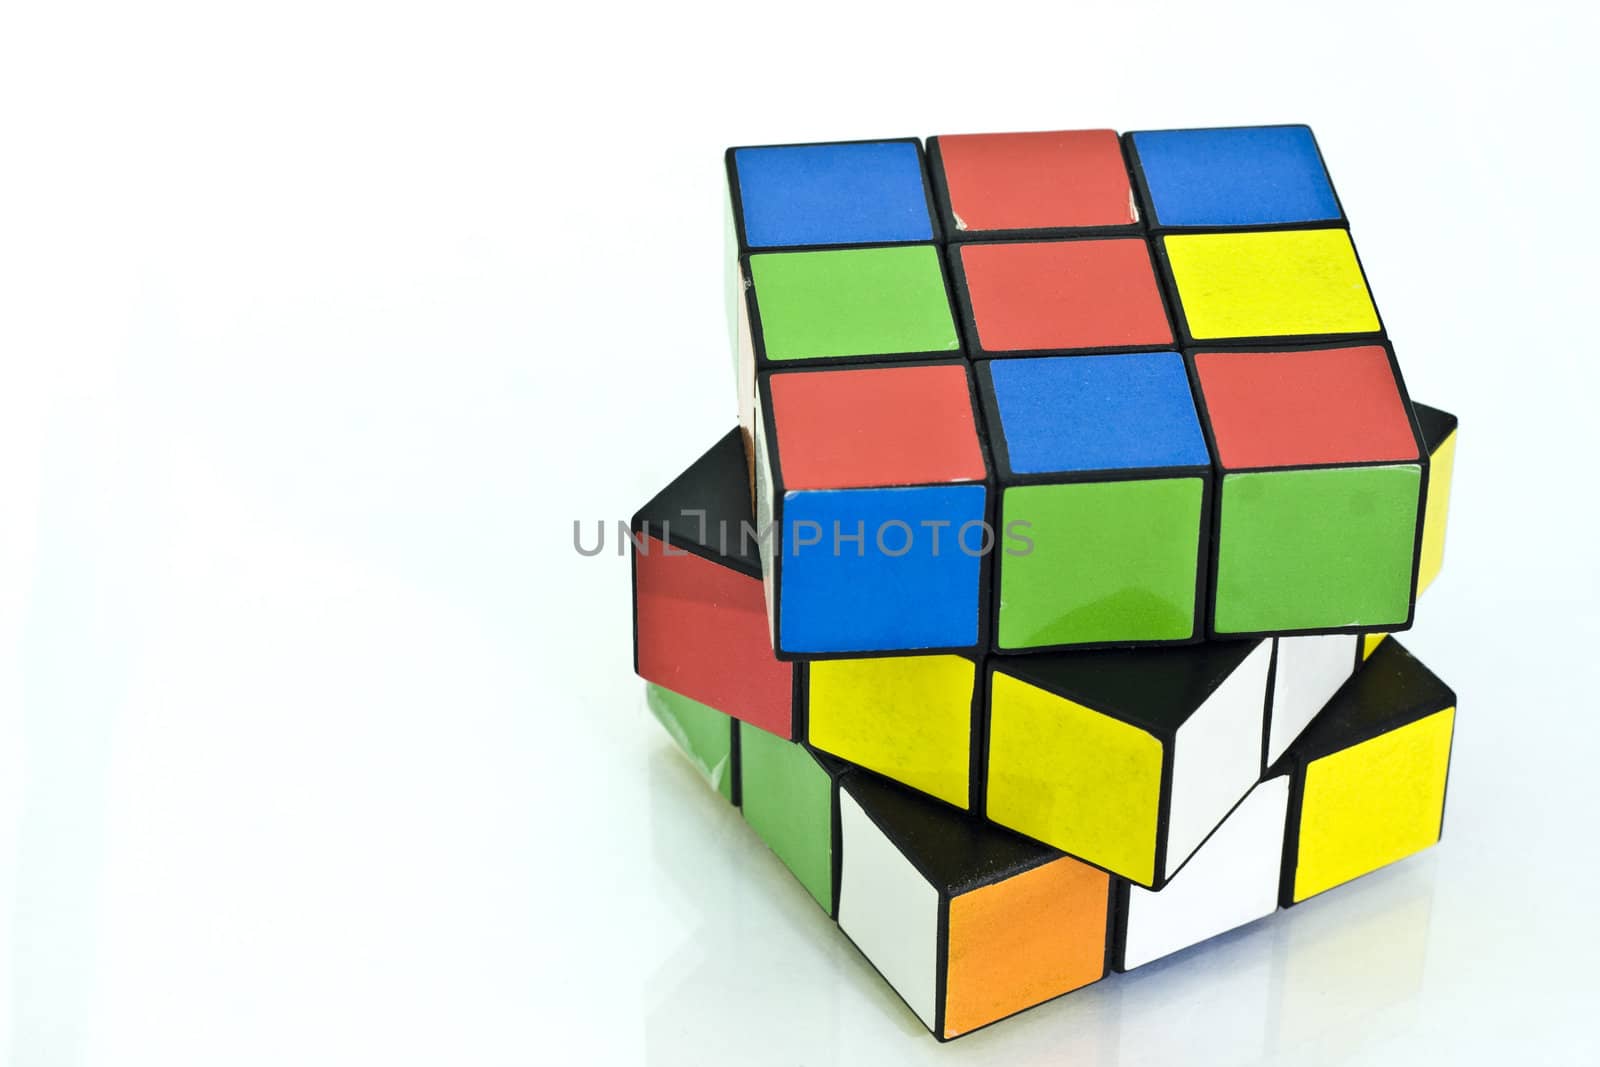 It is a Rubik's cube over white background